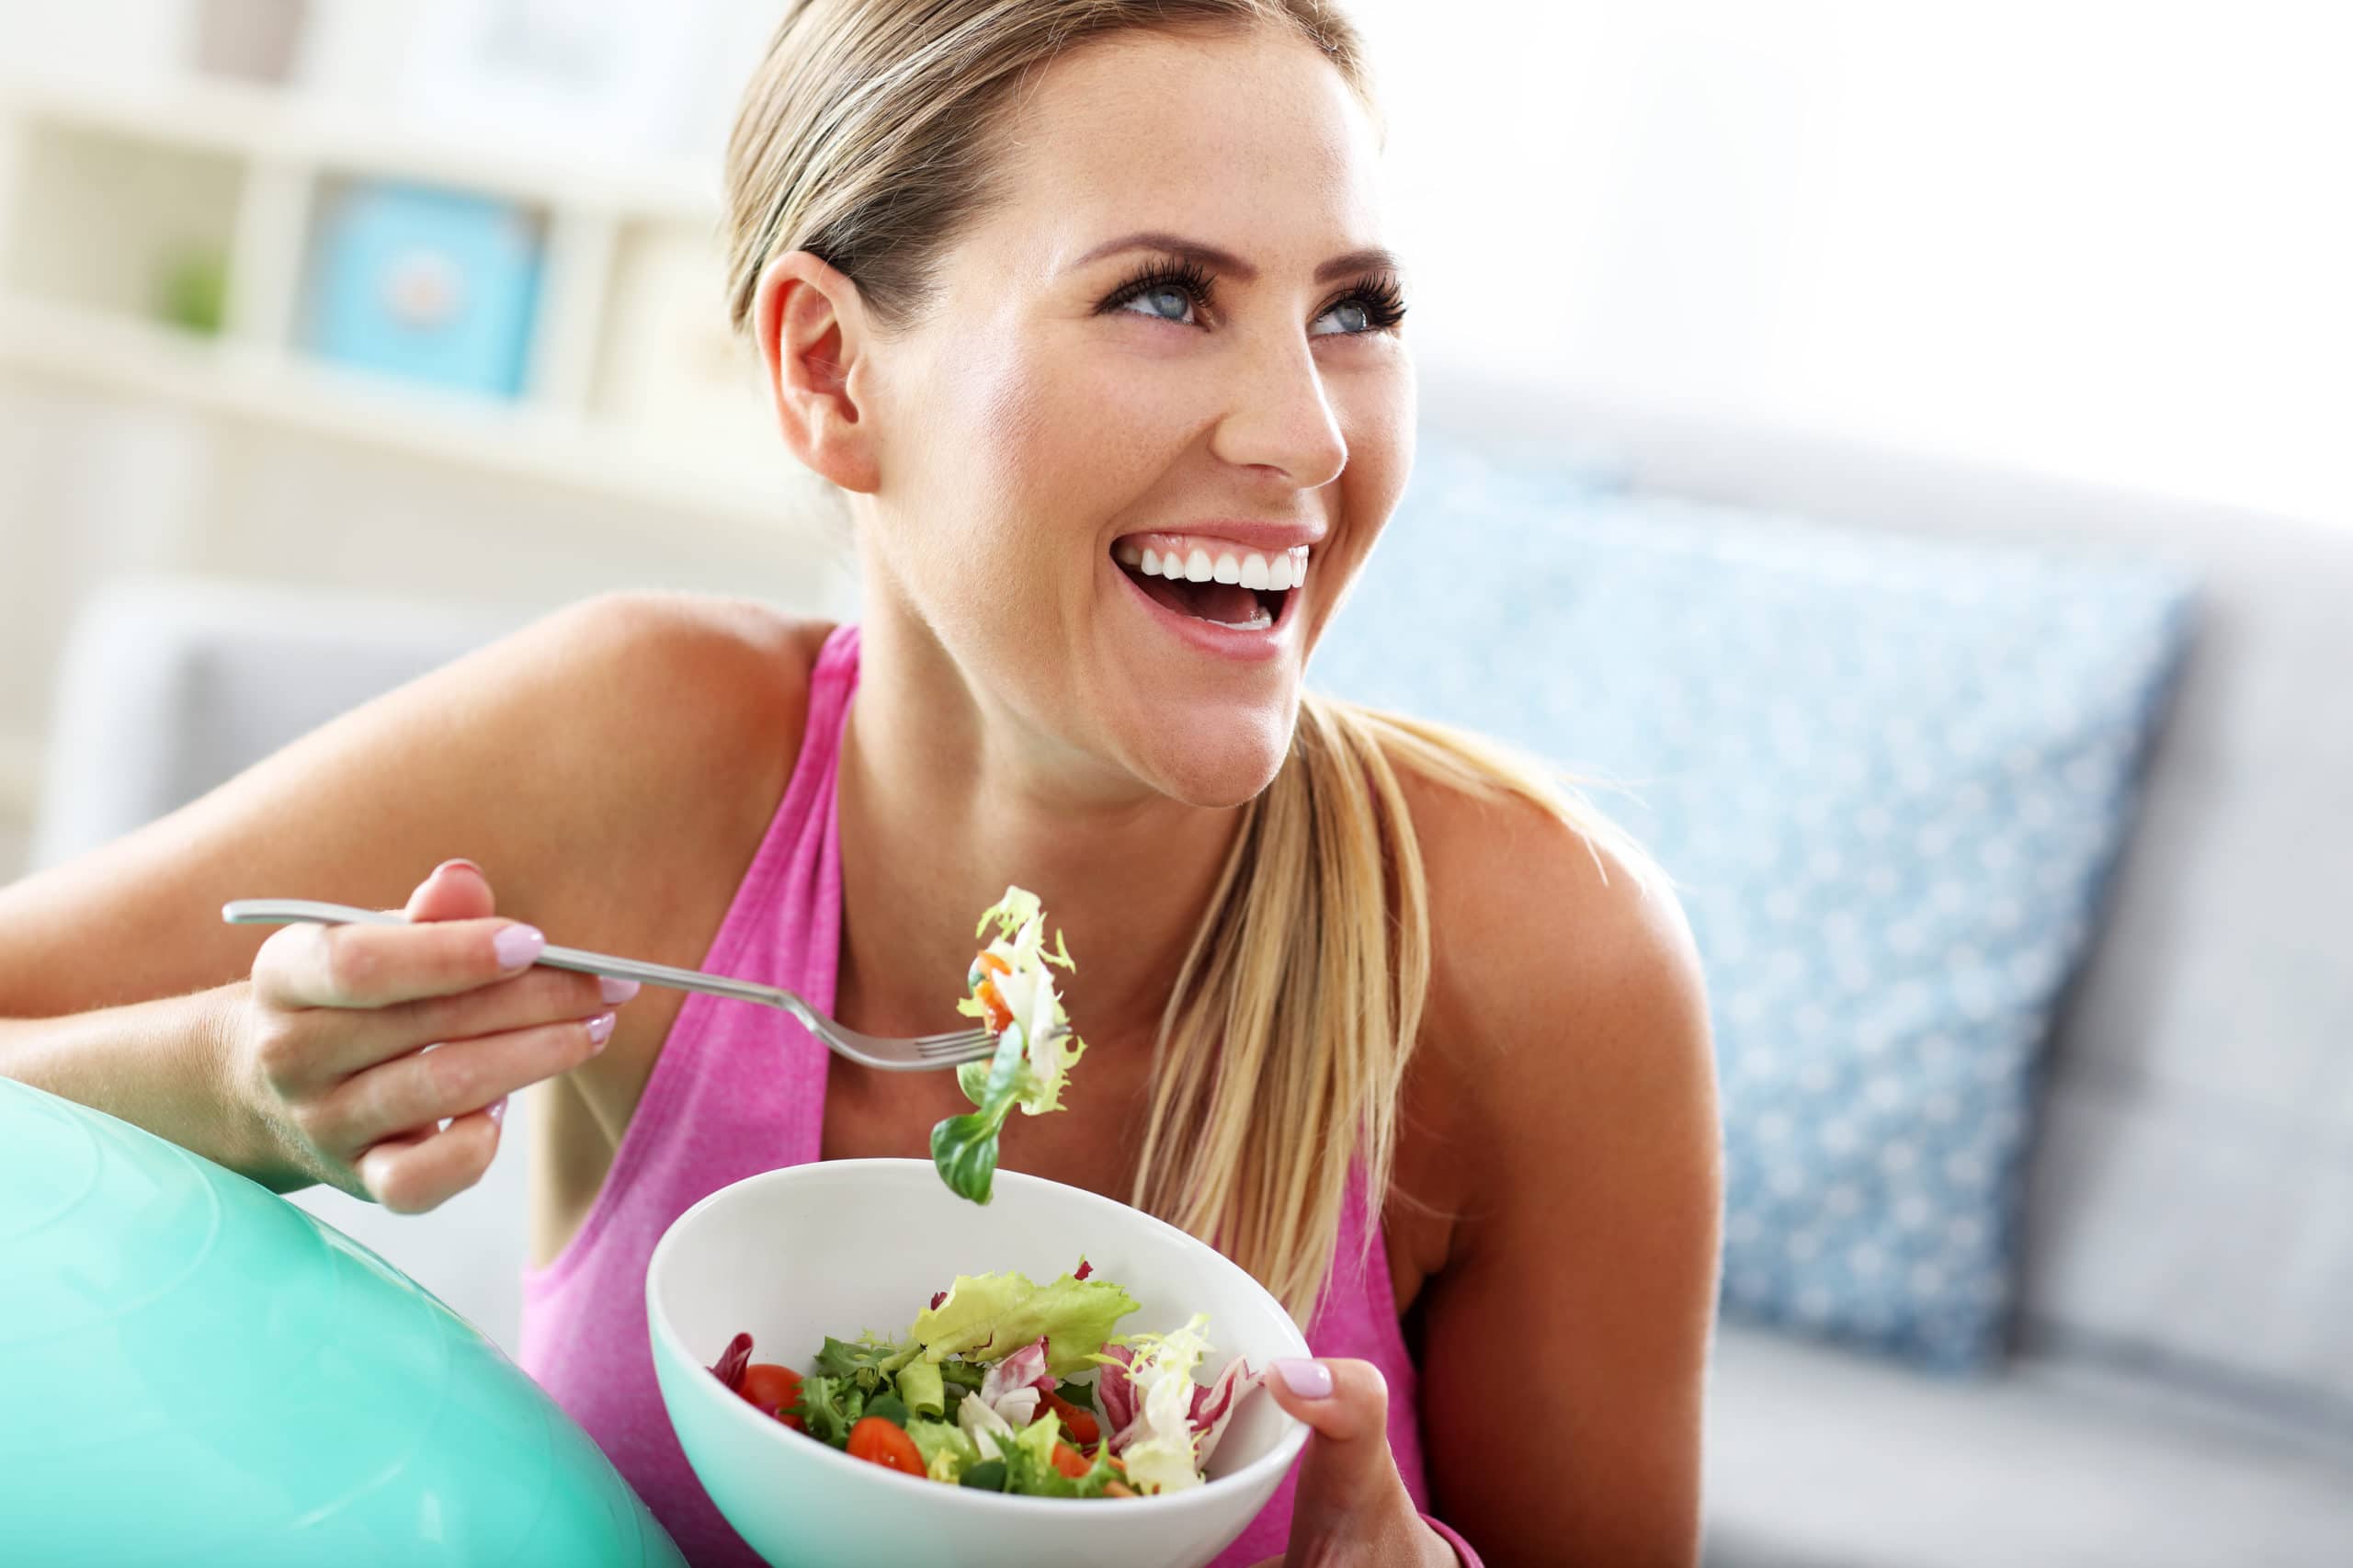 Woman laughing while eating a salad